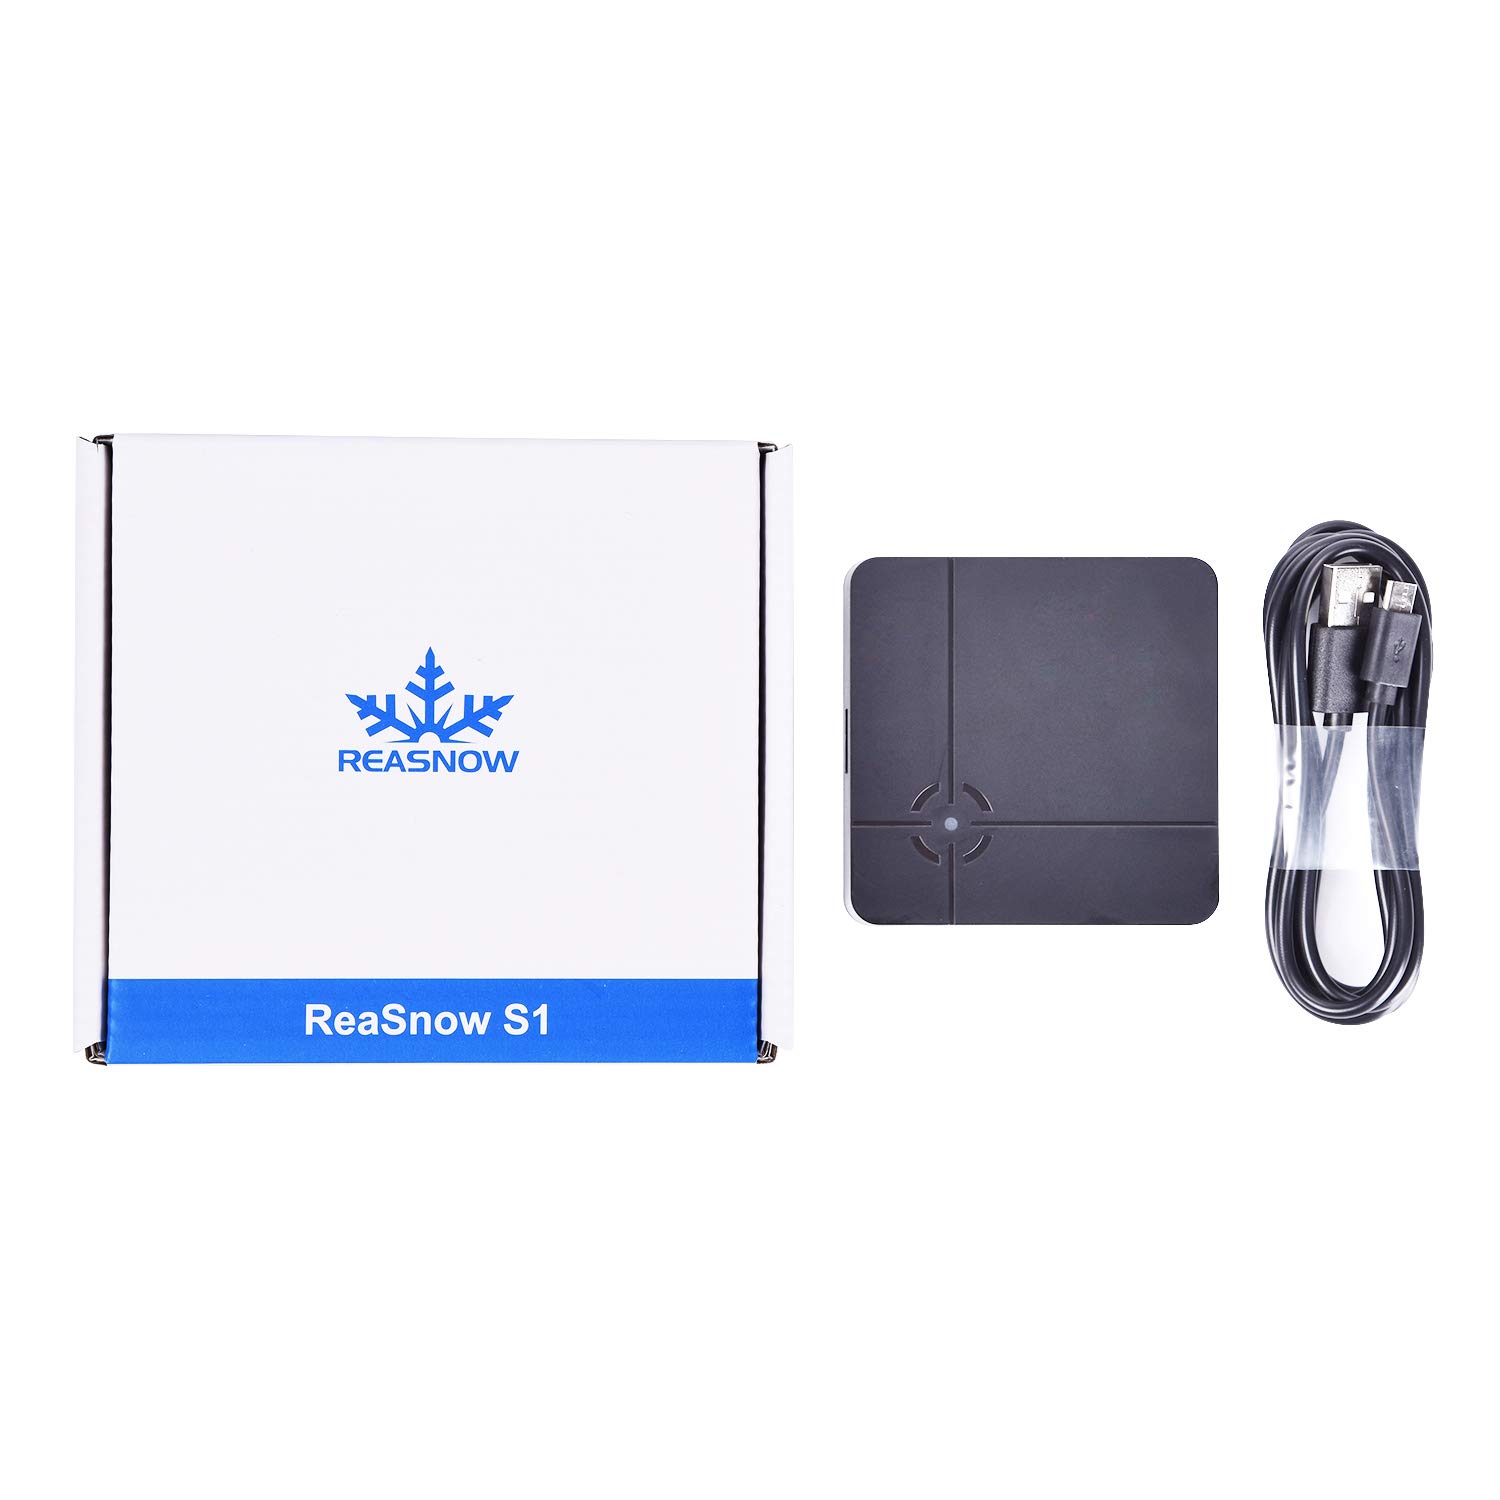 ReaSnow Cross Hair S1 Converter for PS4 Pro PS4 Slim PS4 PS3 Xbox One X Xbox One S Xbox One XBox 360 N-Switch